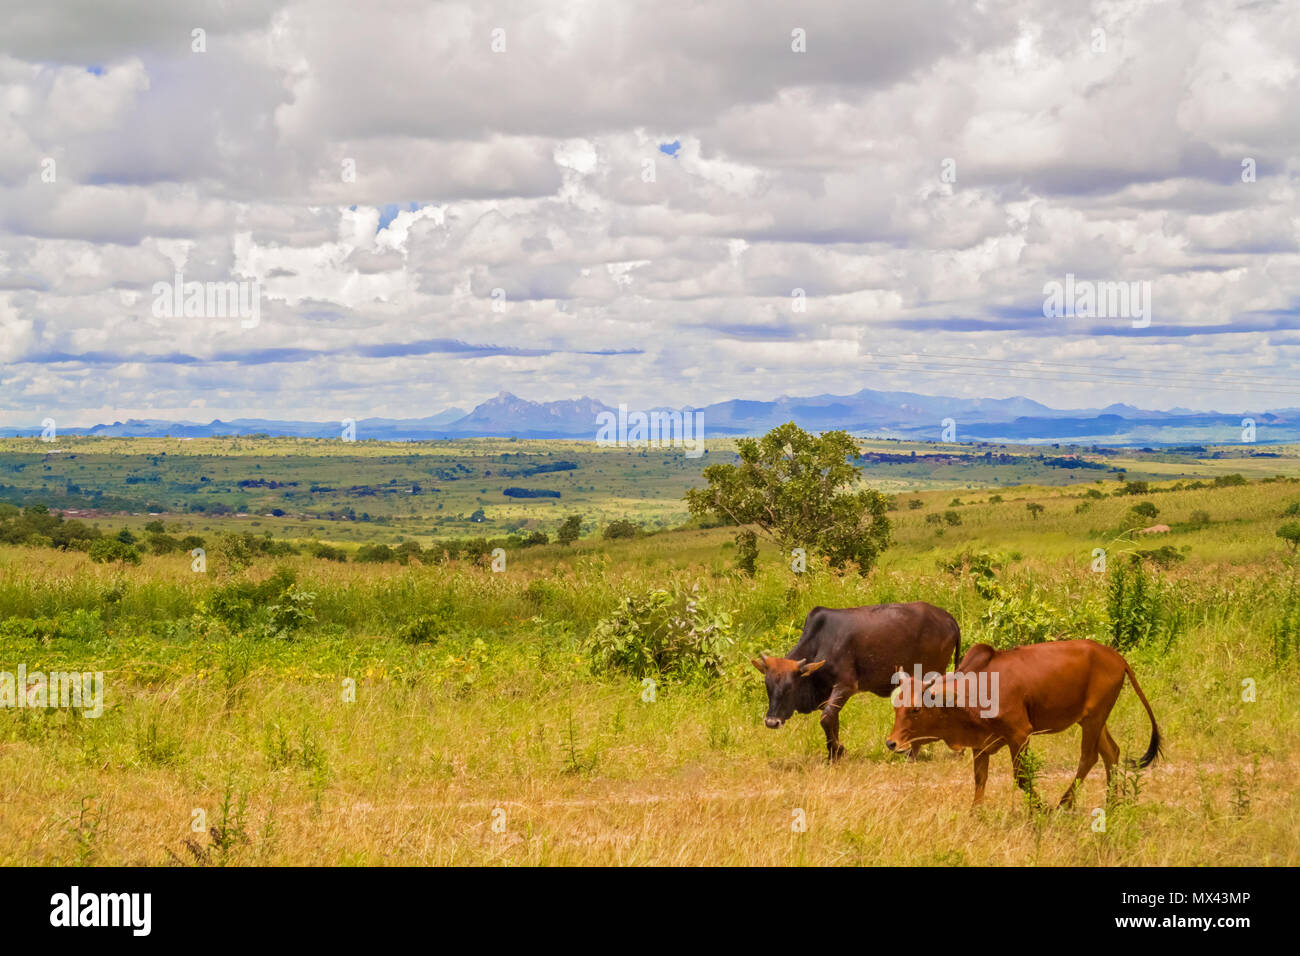 View at picturesque rural landscape near capita city of Malawi, Lilongwe Stock Photo